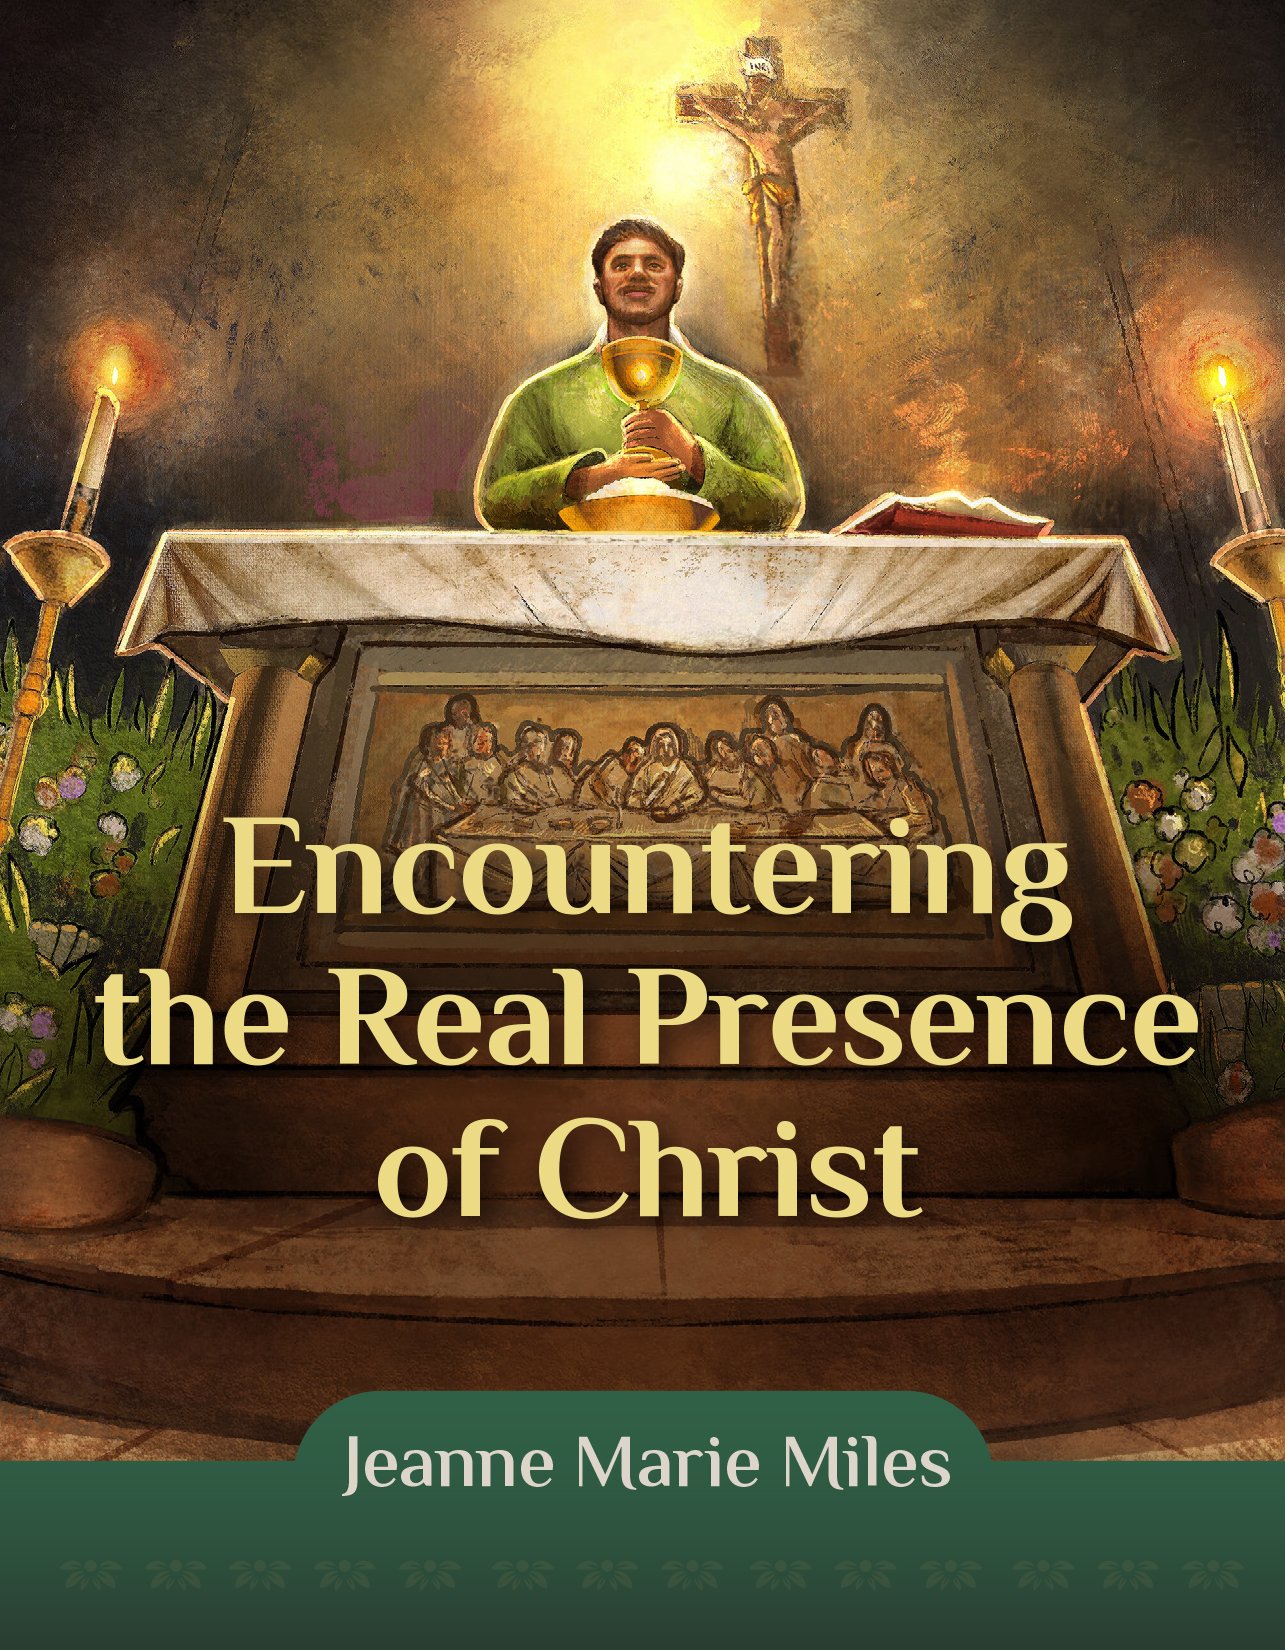 Encountering the Real Presence of Christ